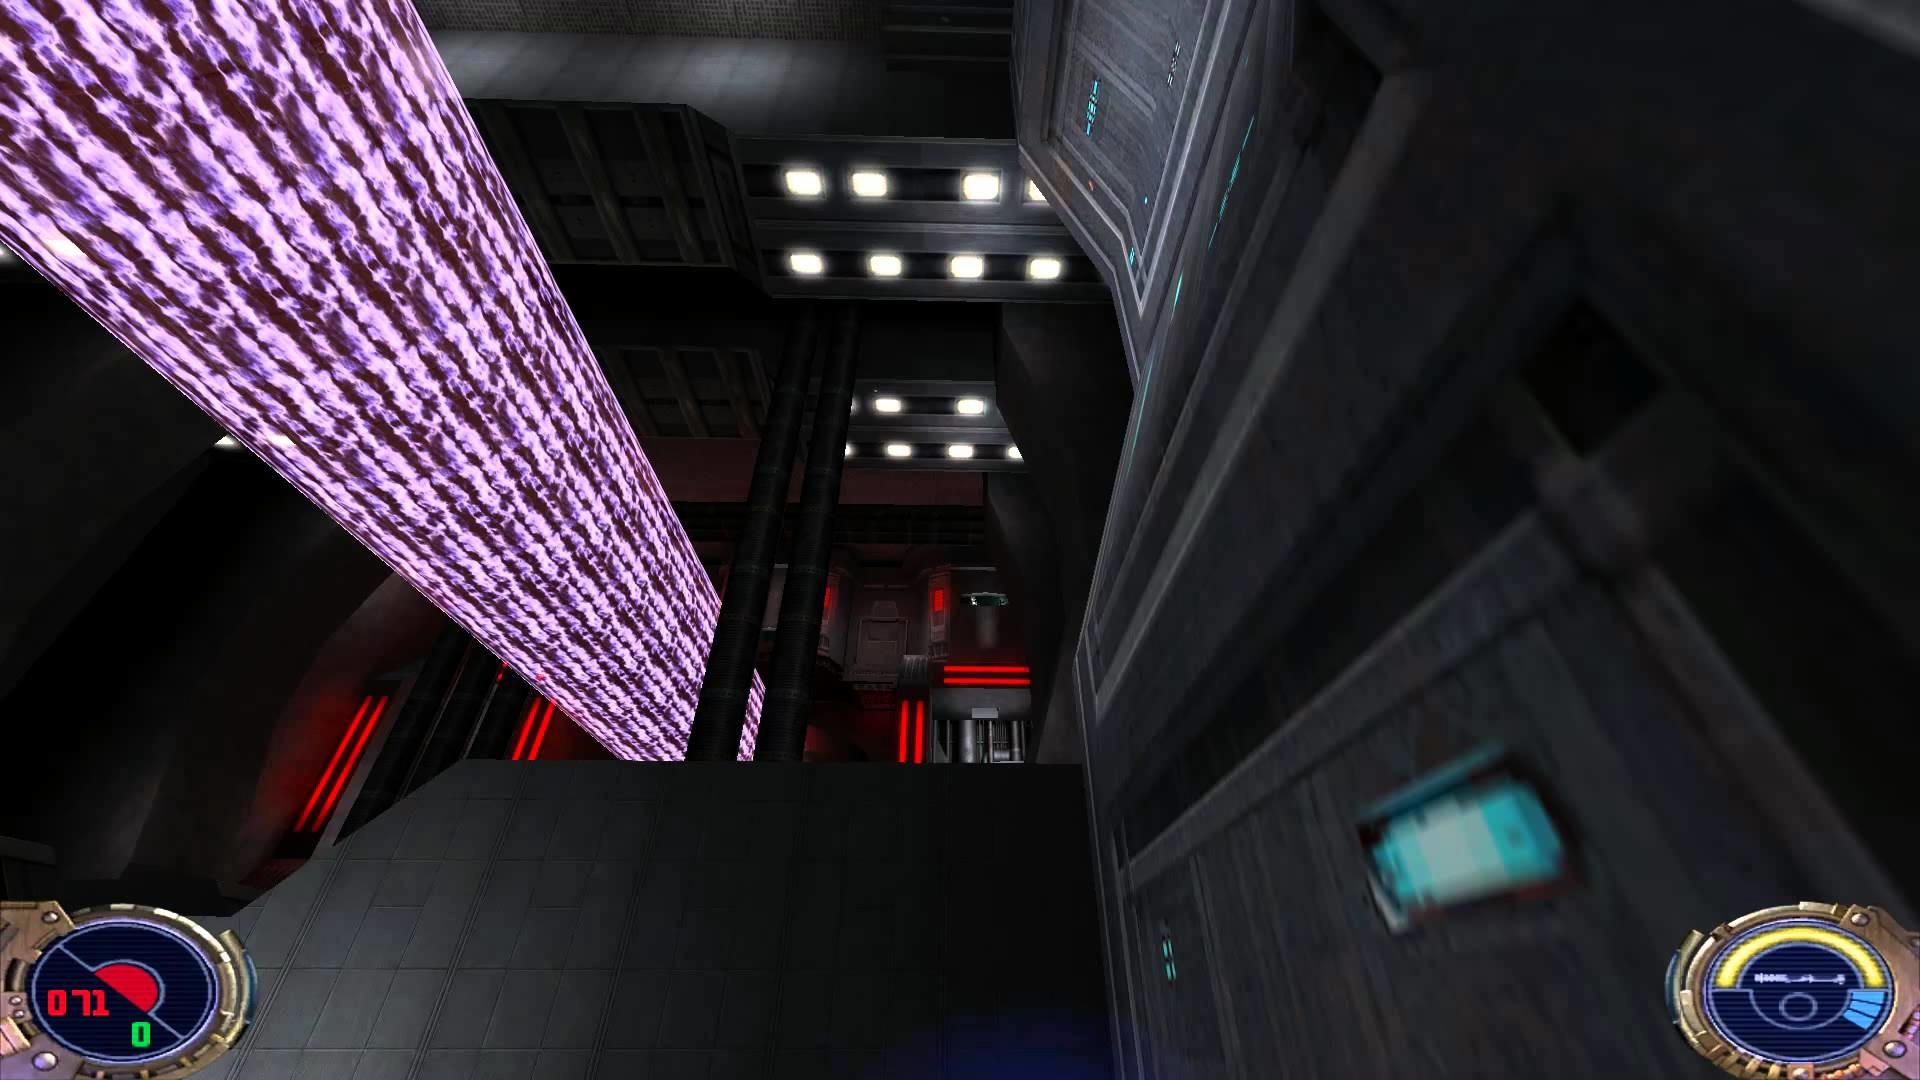 1920x1080 Star Wars Jedi Knight 2 Jedi Outcast Level 16 Cairn Reactor Uncommented  60fps